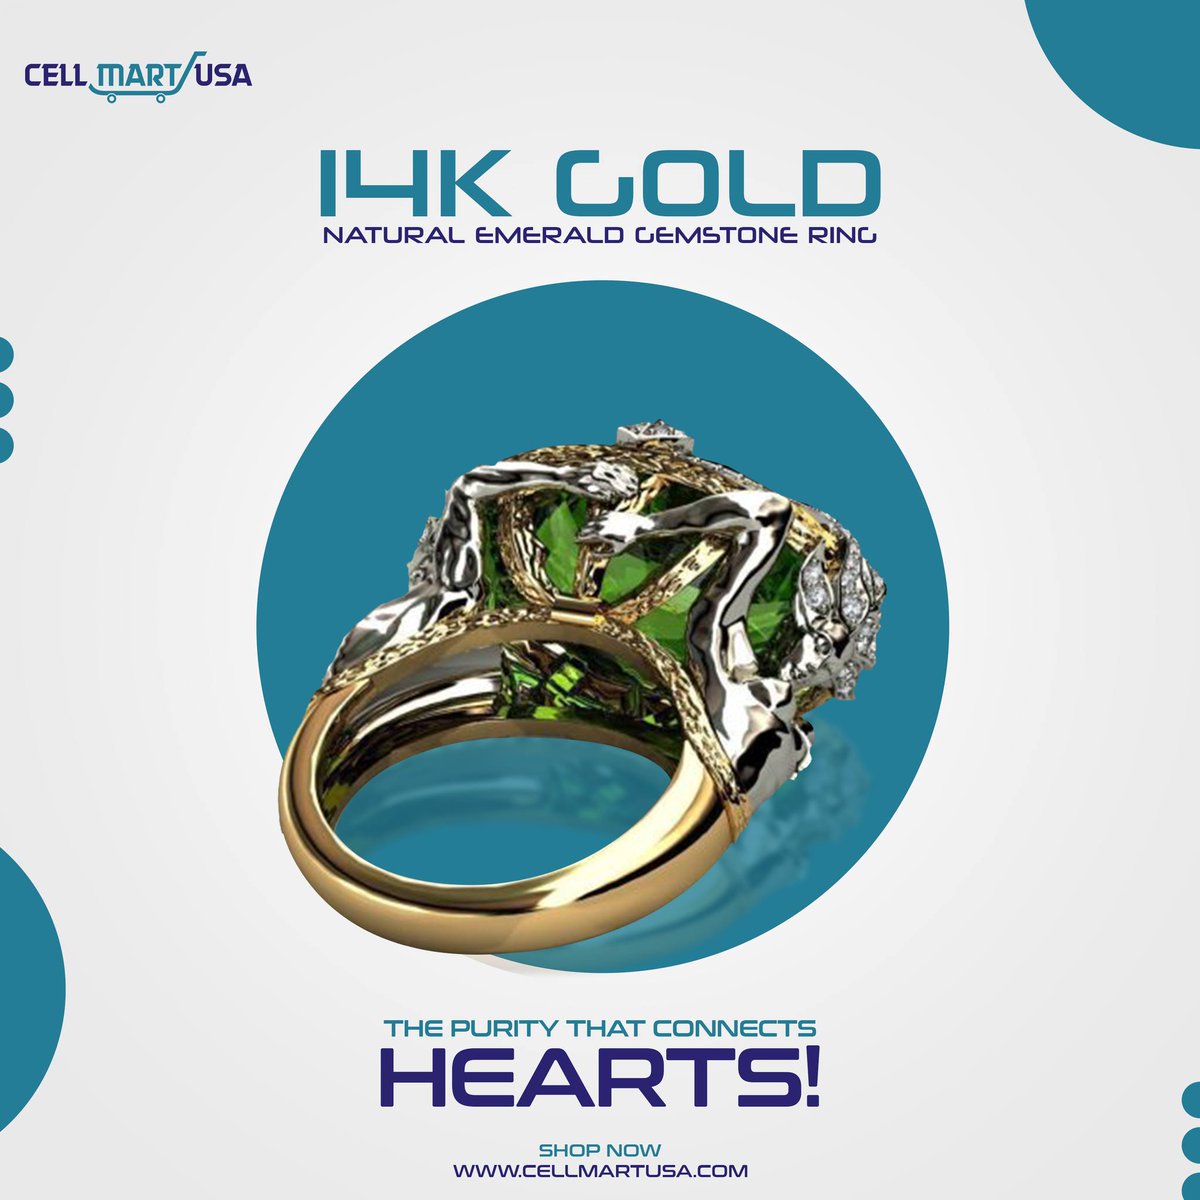 The 14K gold natural emerald gemstone ring is an elegant ring surrounded by an optic set.

#onlineshoppingusa #onlineshoppingsite #onlineshoppingaddict #clothingforsale #70offsale #apparelcollection #apparelandaccessories #cellmartusa #goldrings